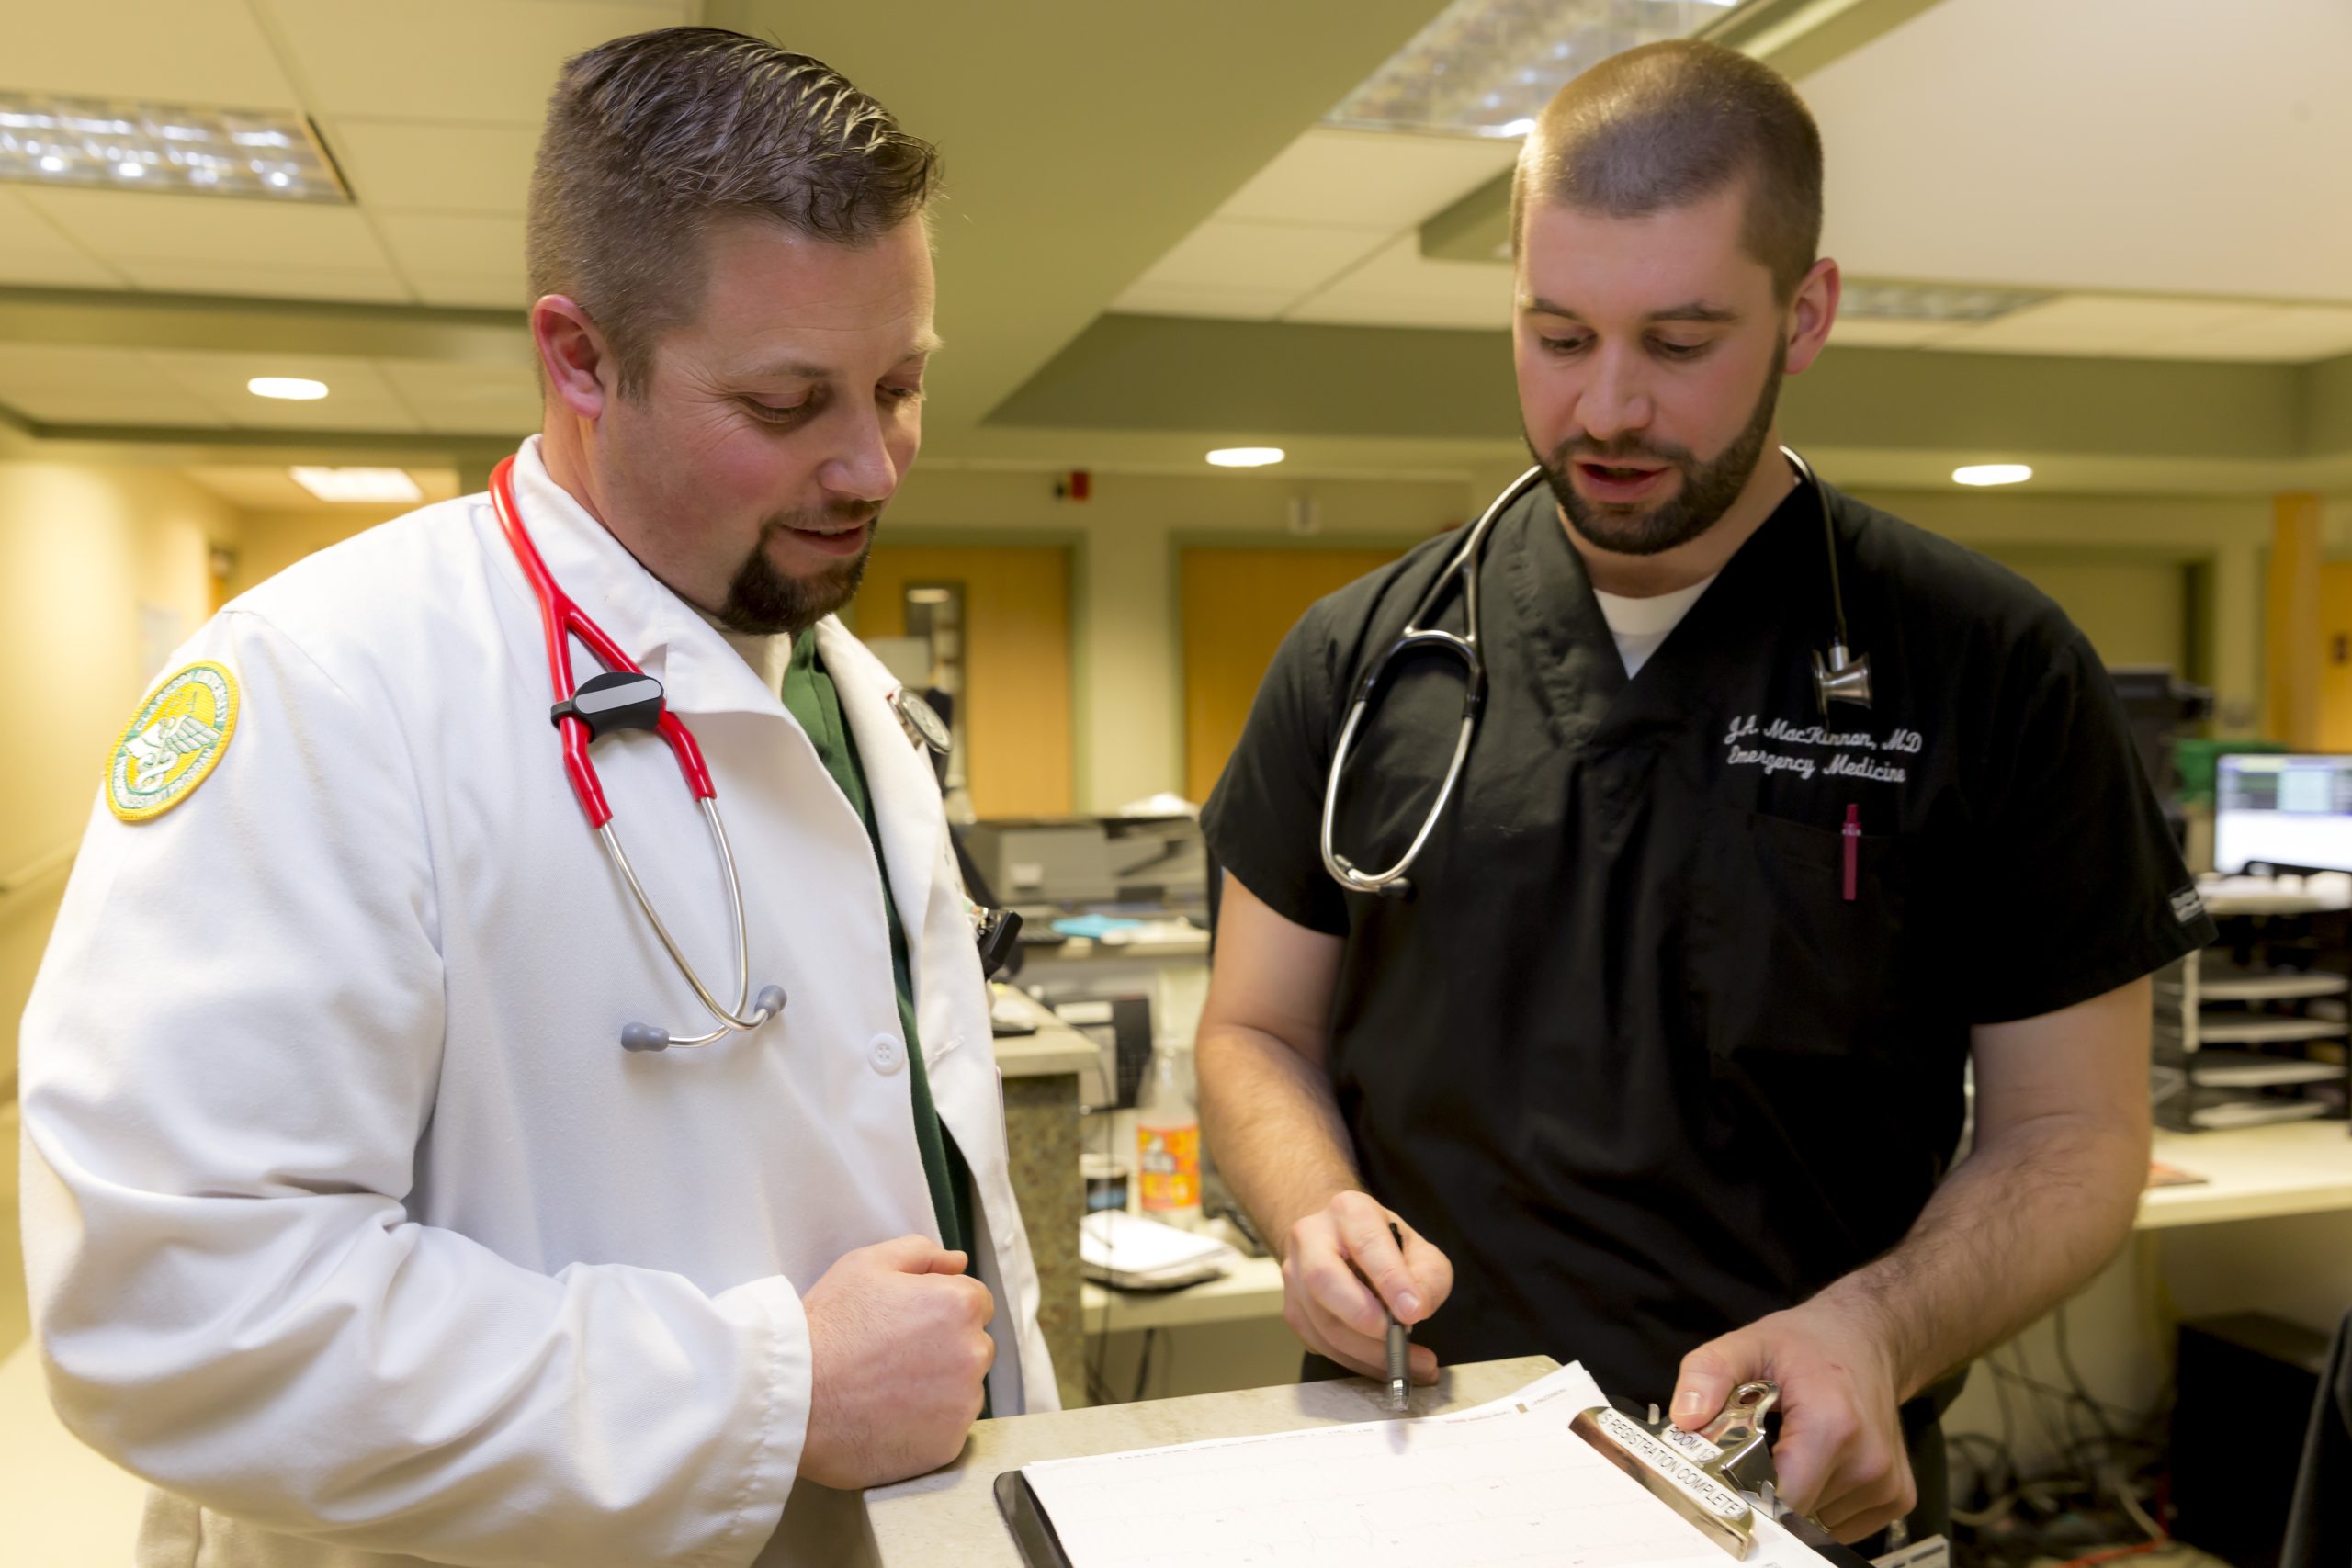 two men in medical garb review a paper on a clipboard.